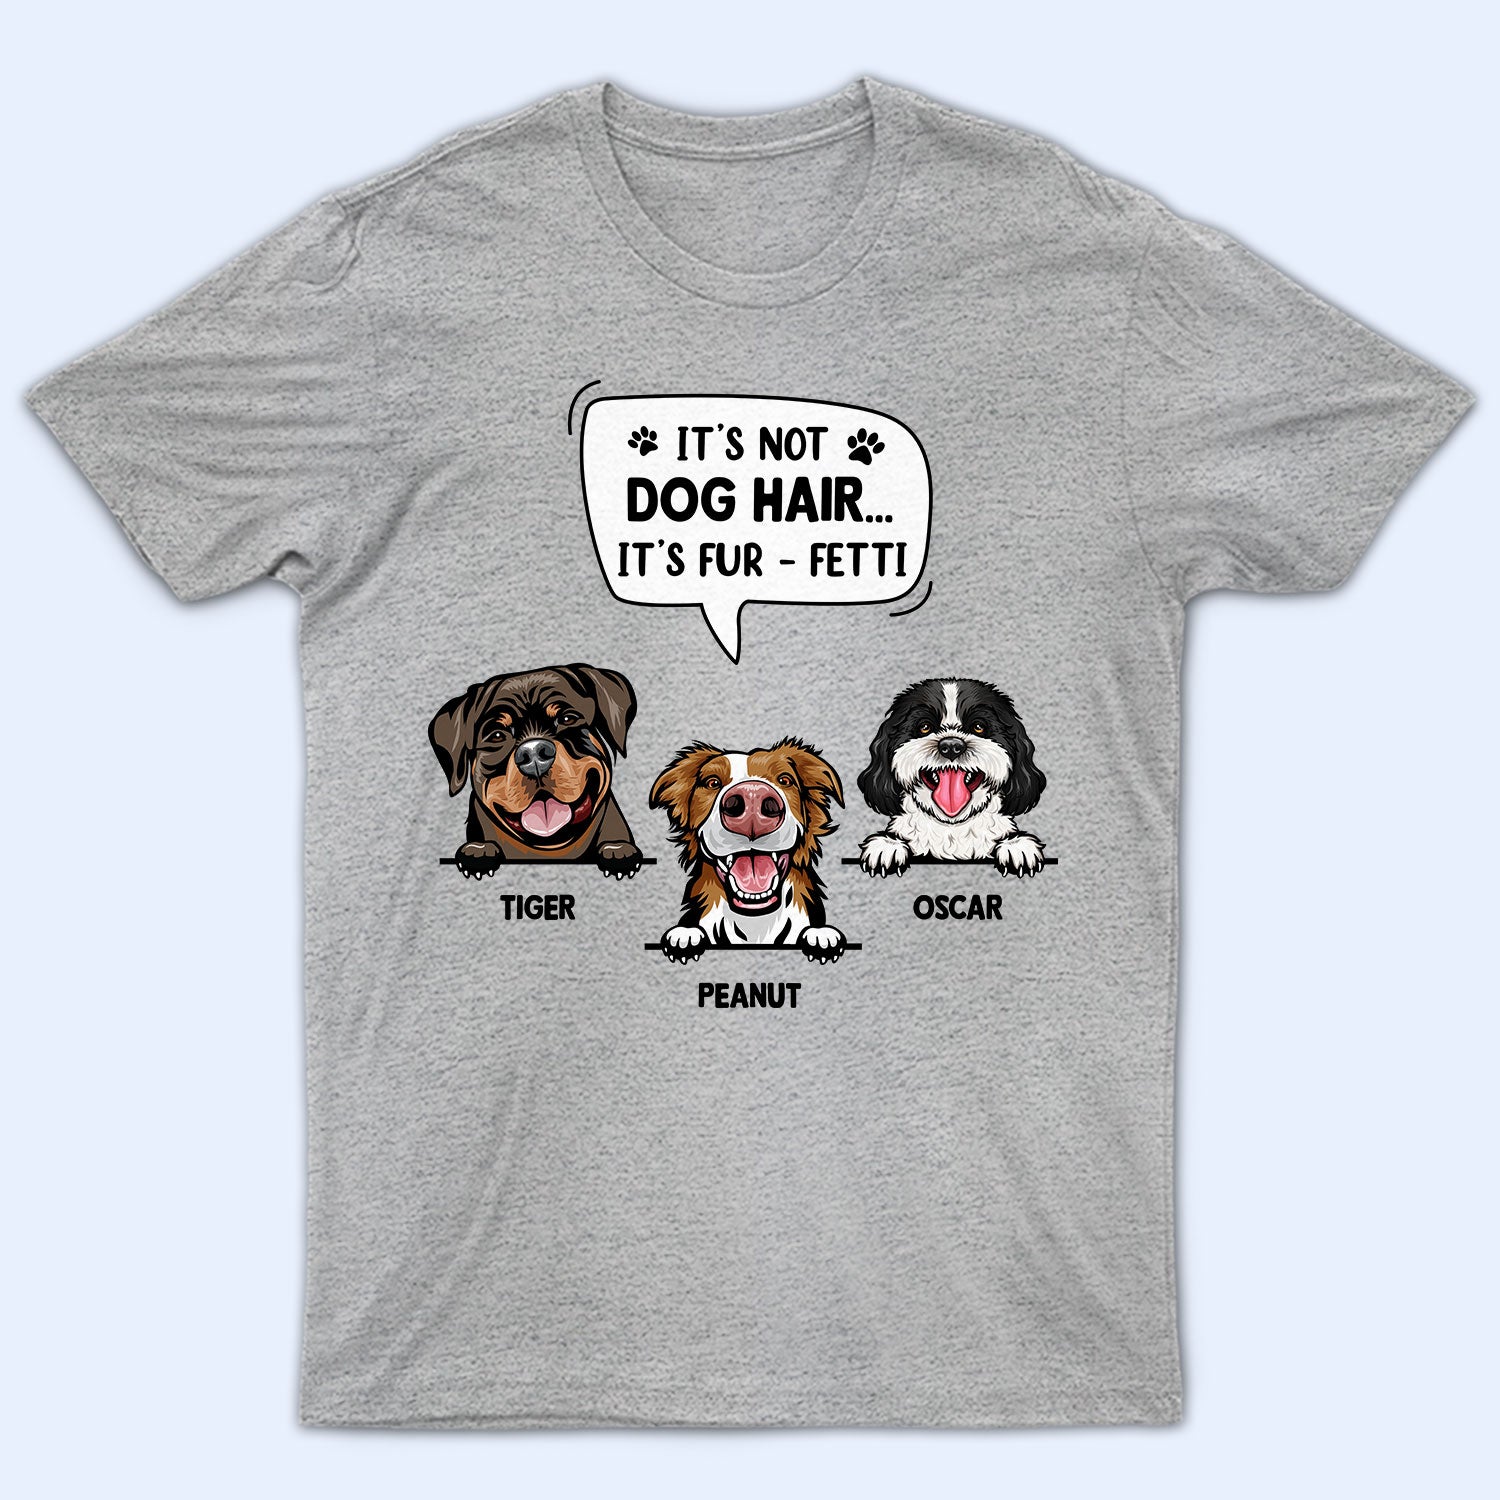 It's Not Dog Hair It's Furfetti - Funny Gift For Dog Lovers - Personalized T Shirt